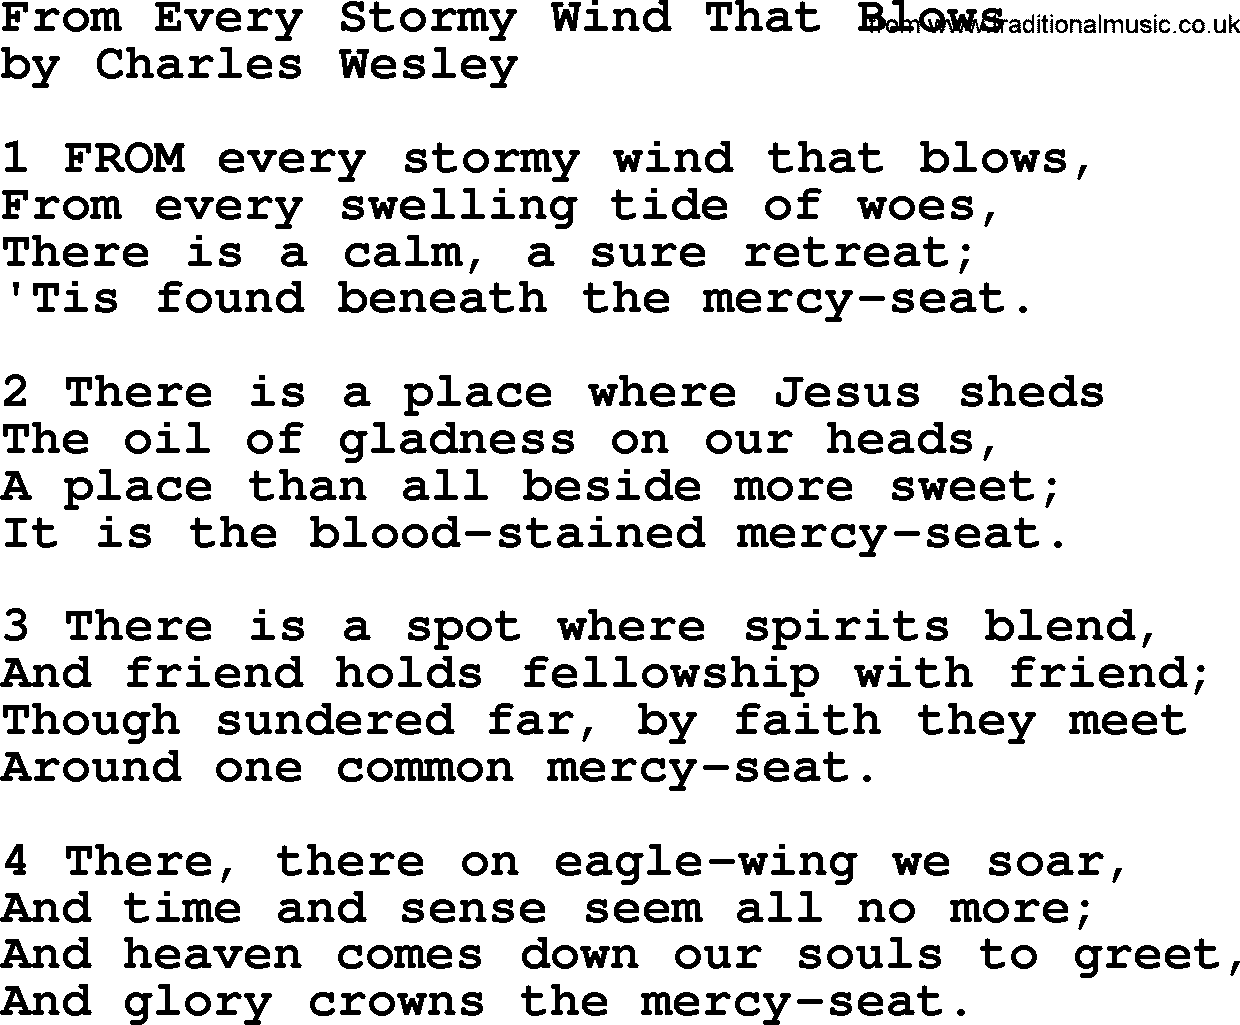 Charles Wesley hymn: From Every Stormy Wind That Blows, lyrics